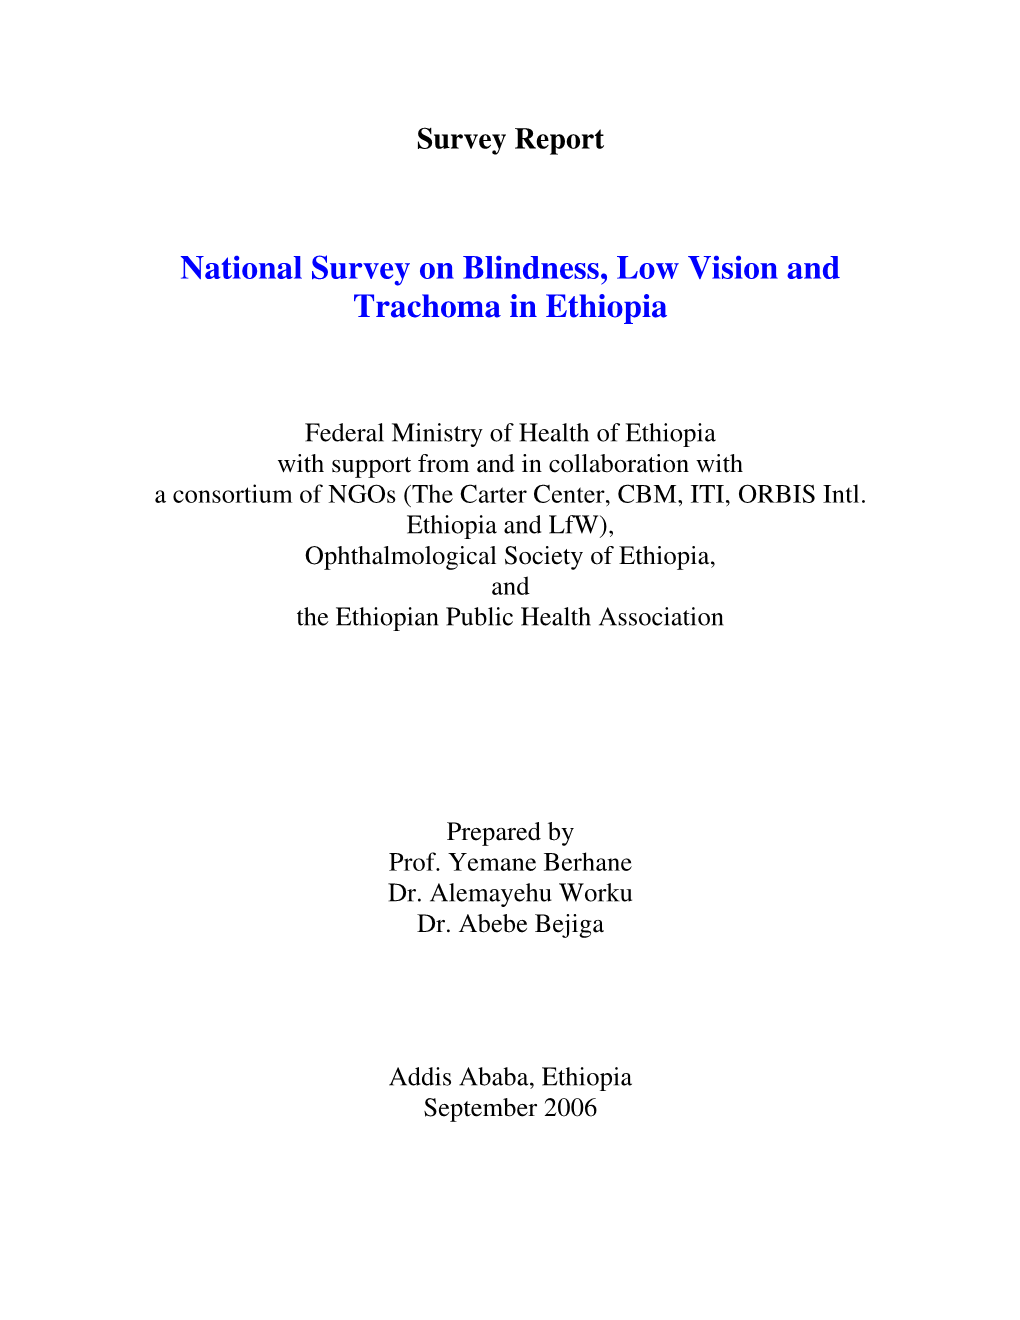 National Survey on Blindness, Low Vision and Trachoma in Ethiopia